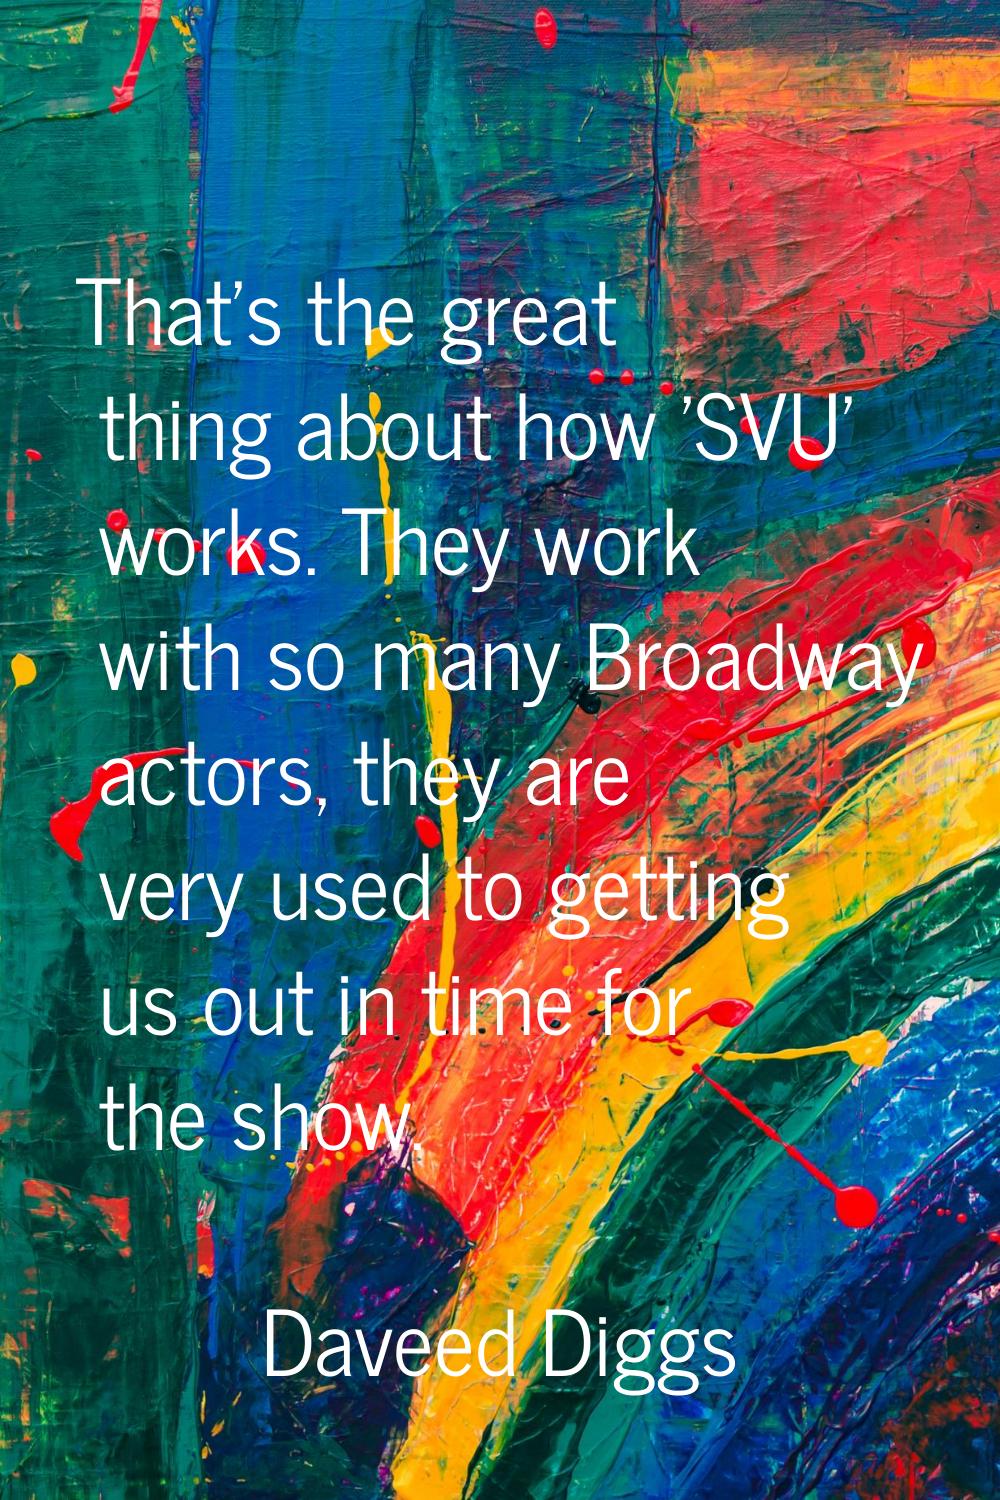 That's the great thing about how 'SVU' works. They work with so many Broadway actors, they are very